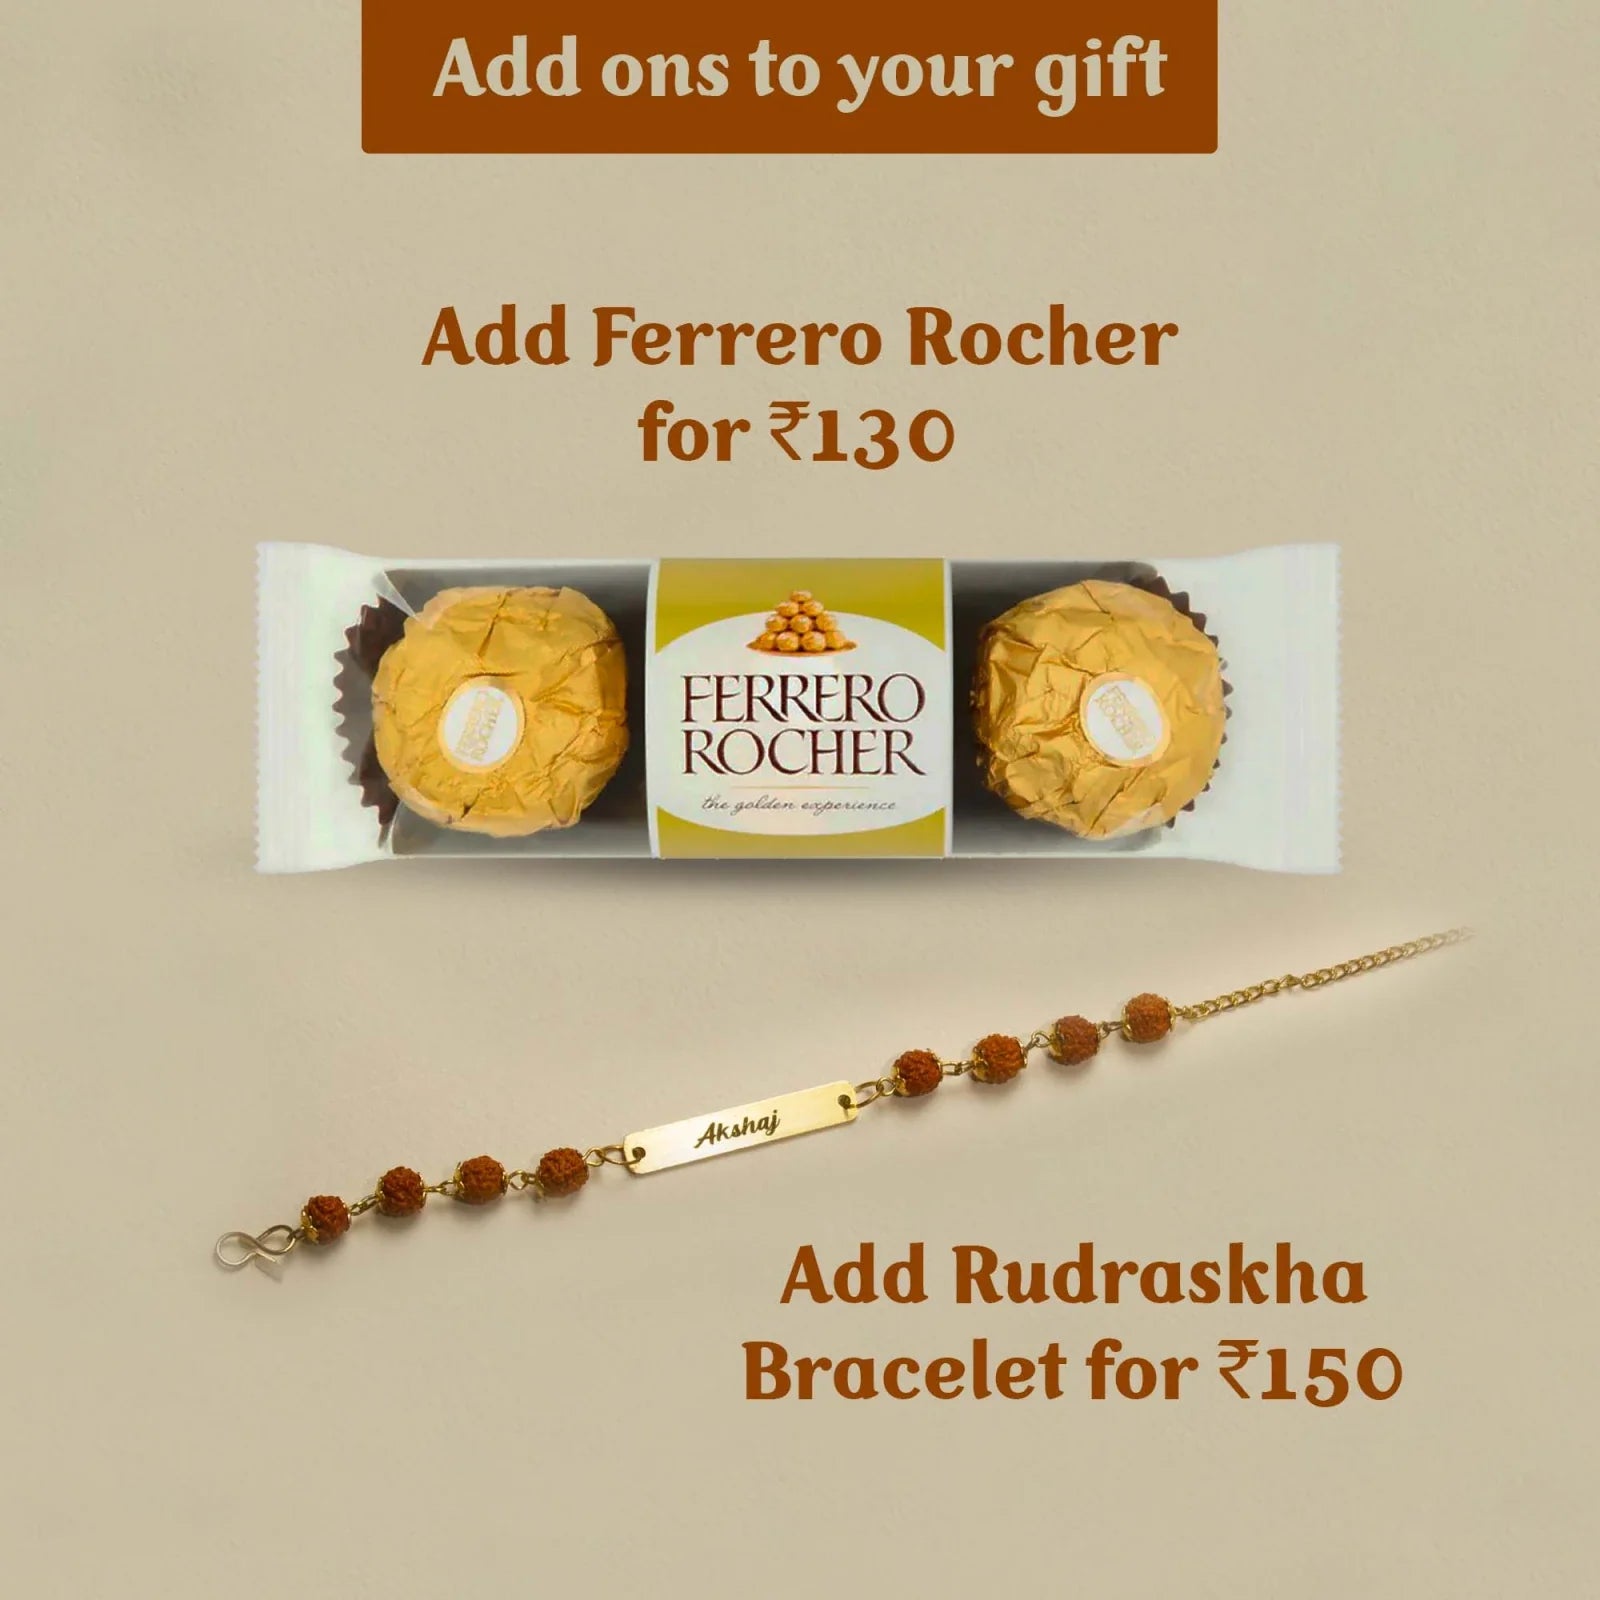 Lady Wallet + Men's Wallet (Couple Gift 1) - Wine.Sweeten the joy of every occasion with the delicious and all-time-favourite ferraro rocher.  Do not miss the elegant and classy rudraksha bracelet for your loved ones.